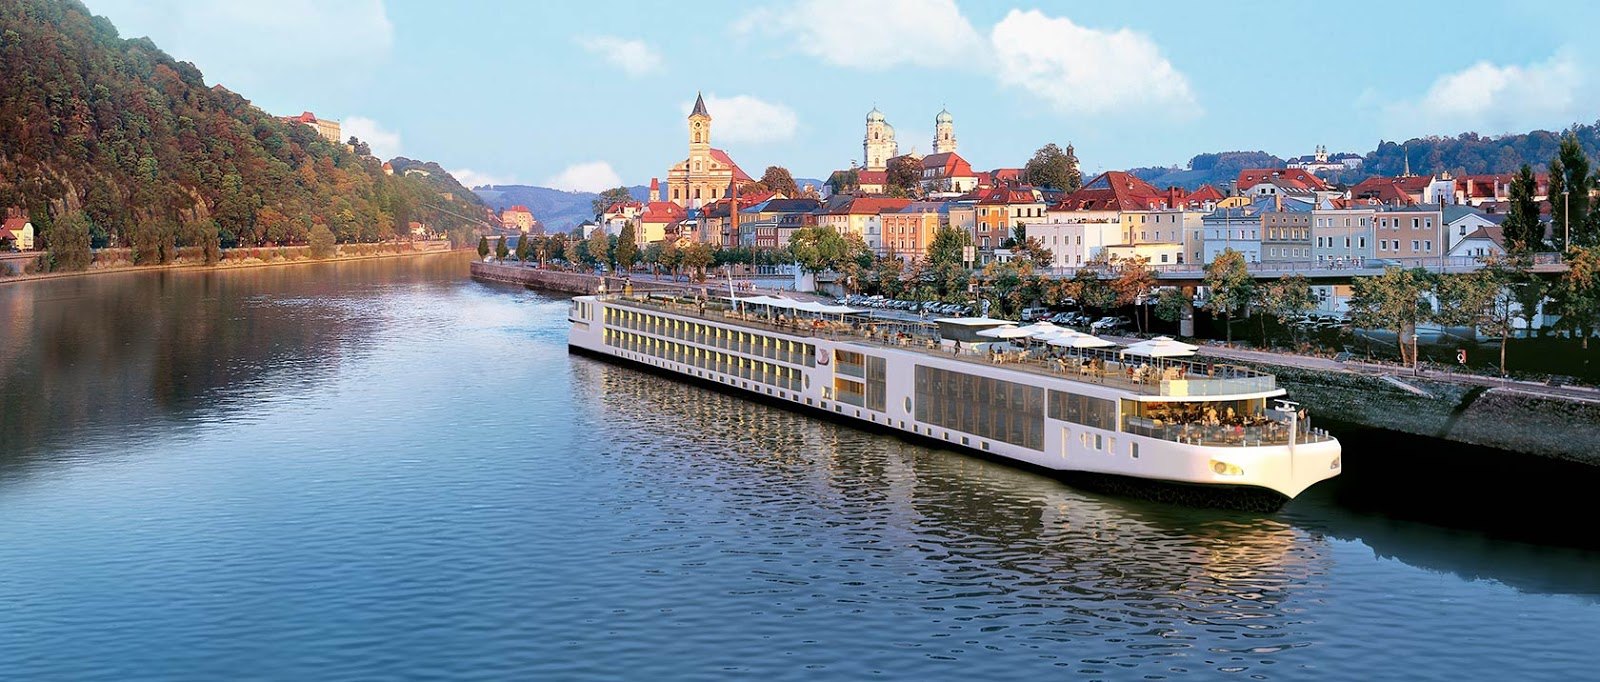 Explore a New Way to Travel with Scenic River Cruises through Europe